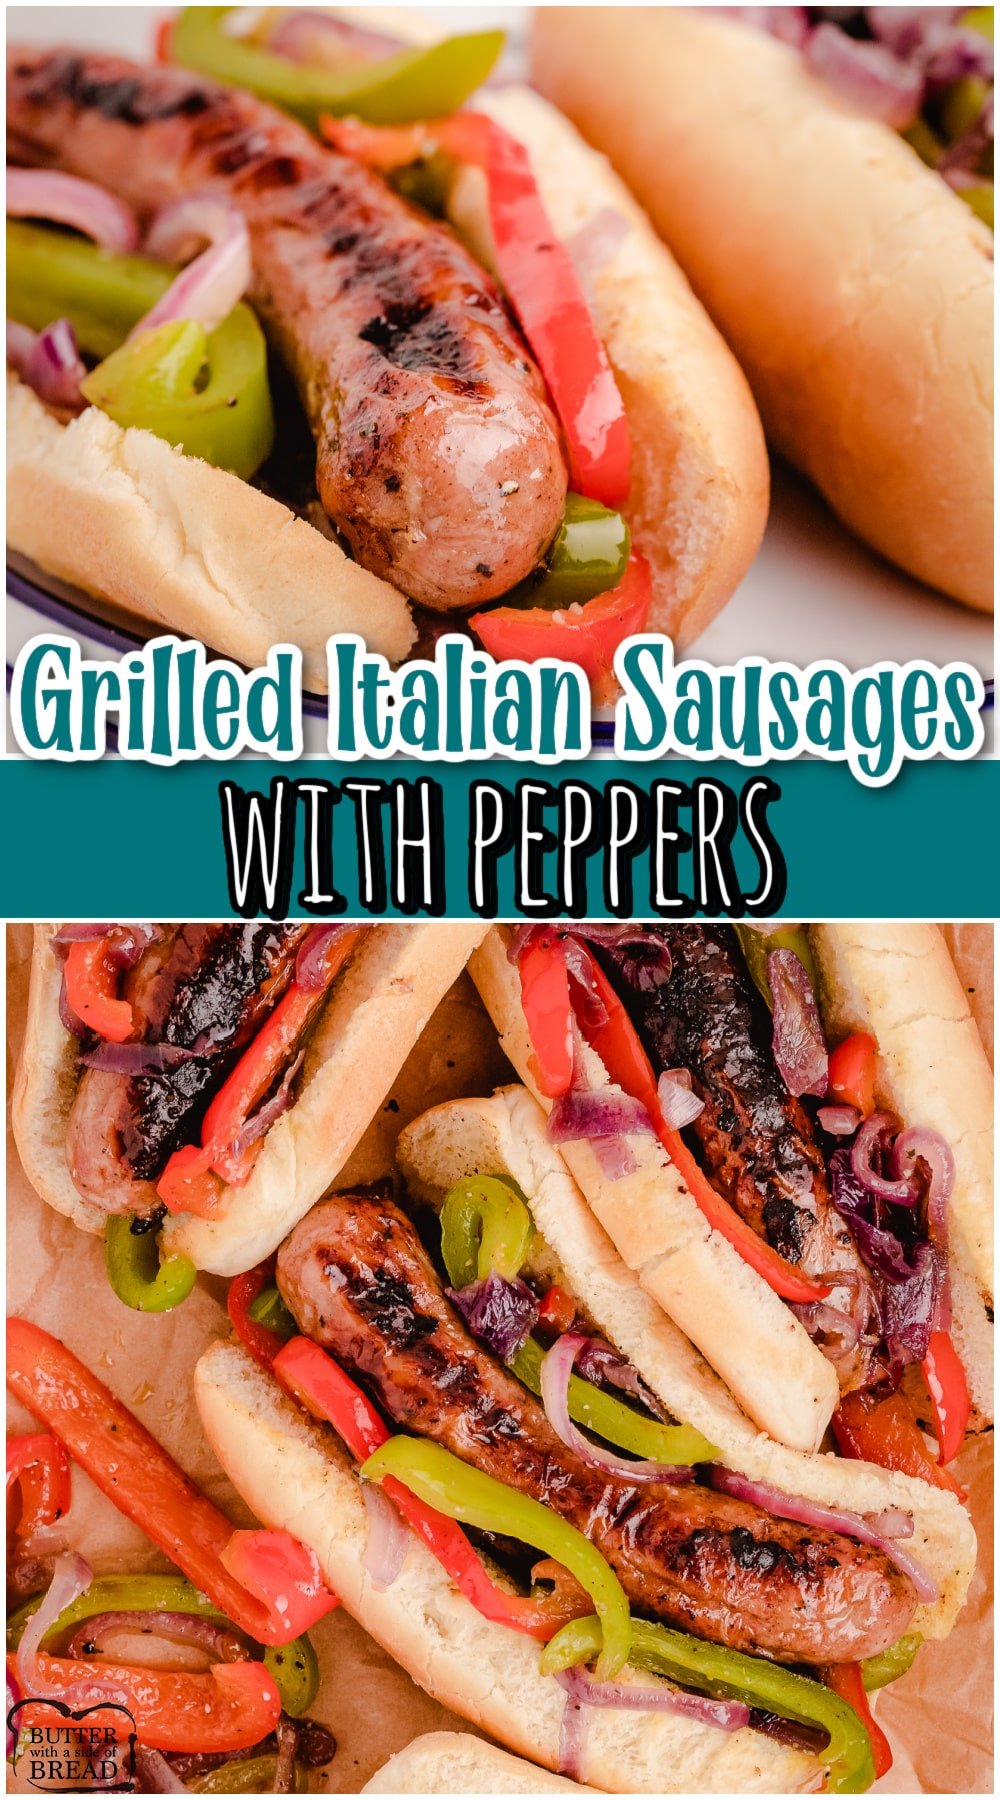 These grilled Italian sausages with peppers are one of our favorite simple dinner ideas! Grill the sausages & pair them with sauteed onions and peppers in a soft bun. Yum!